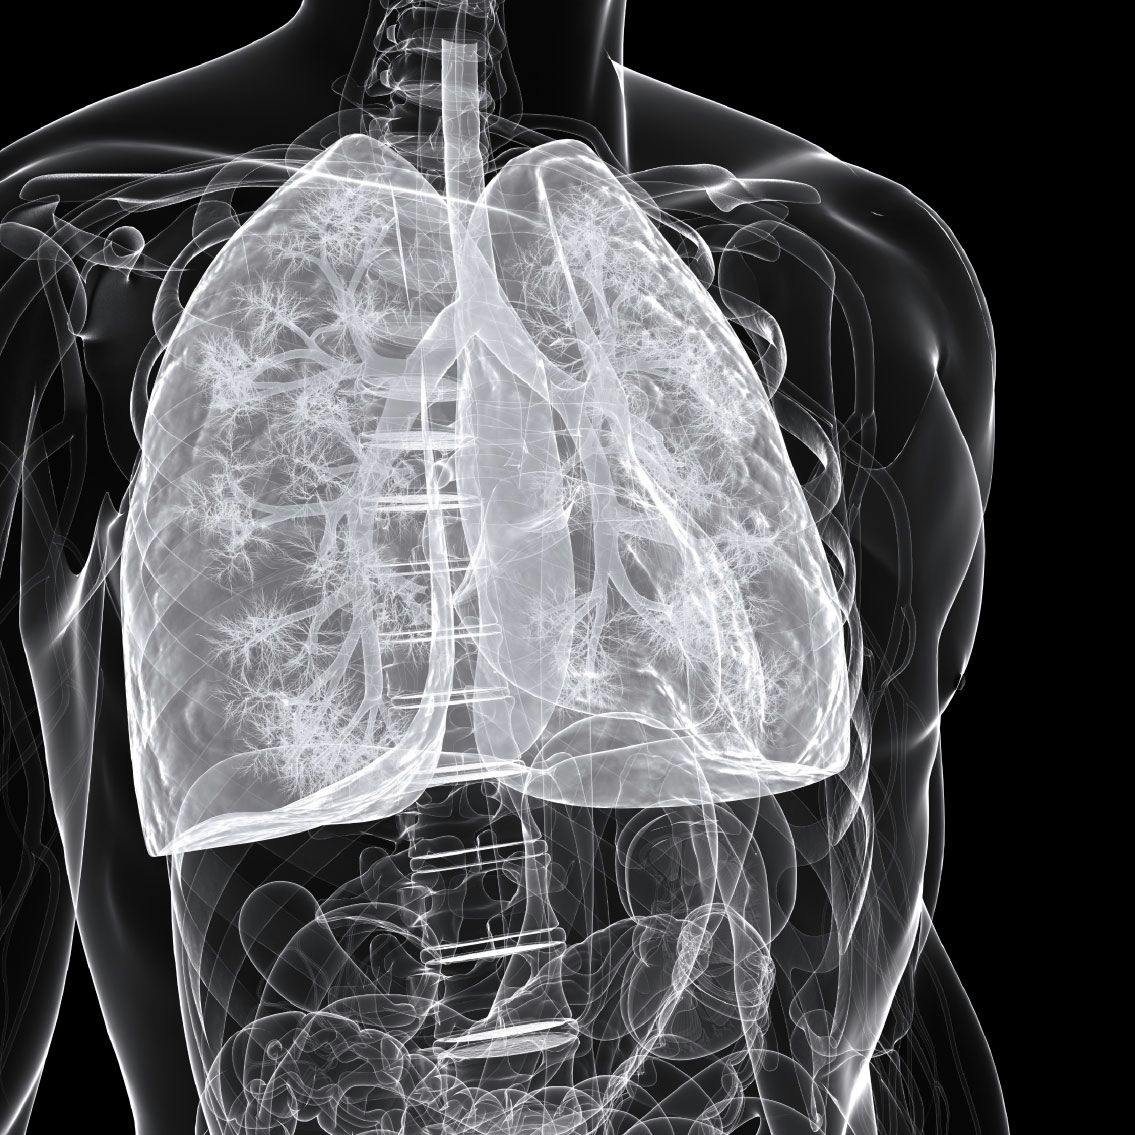 Keytruda Shows Benefit in Small Cell Lung Cancer